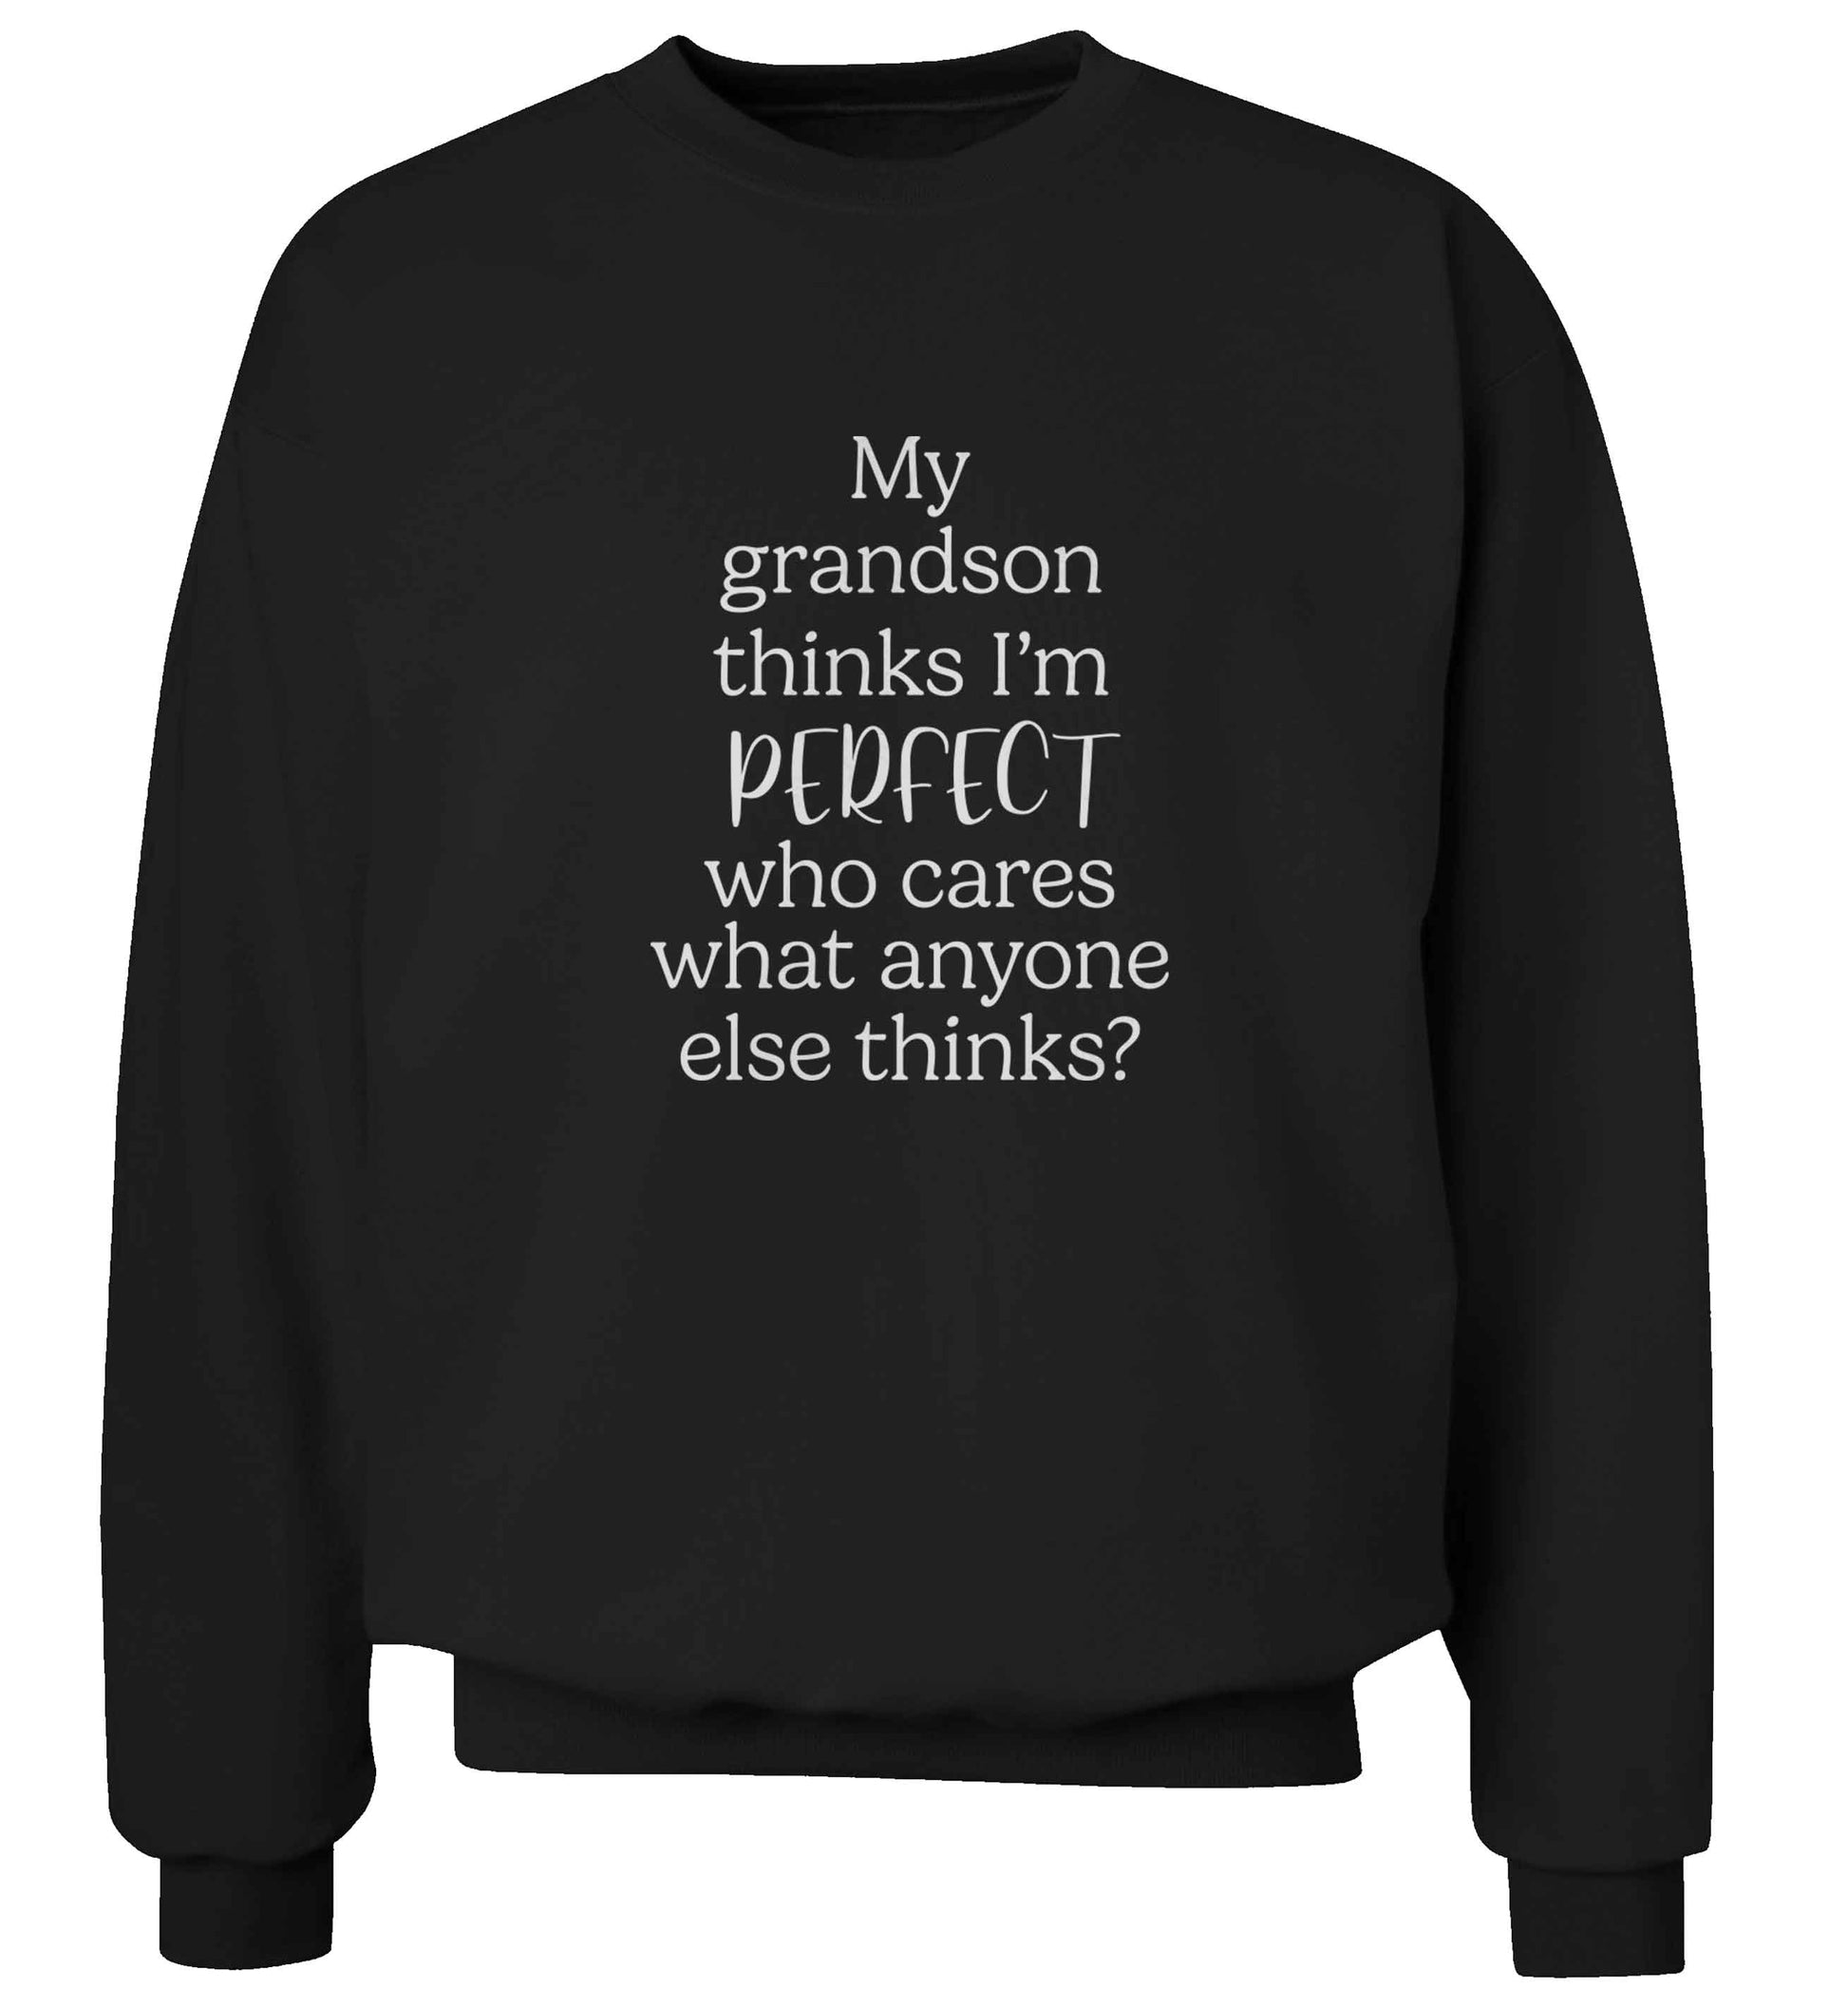 My Grandson thinks I'm perfect who cares what anyone else thinks? adult's unisex black sweater 2XL